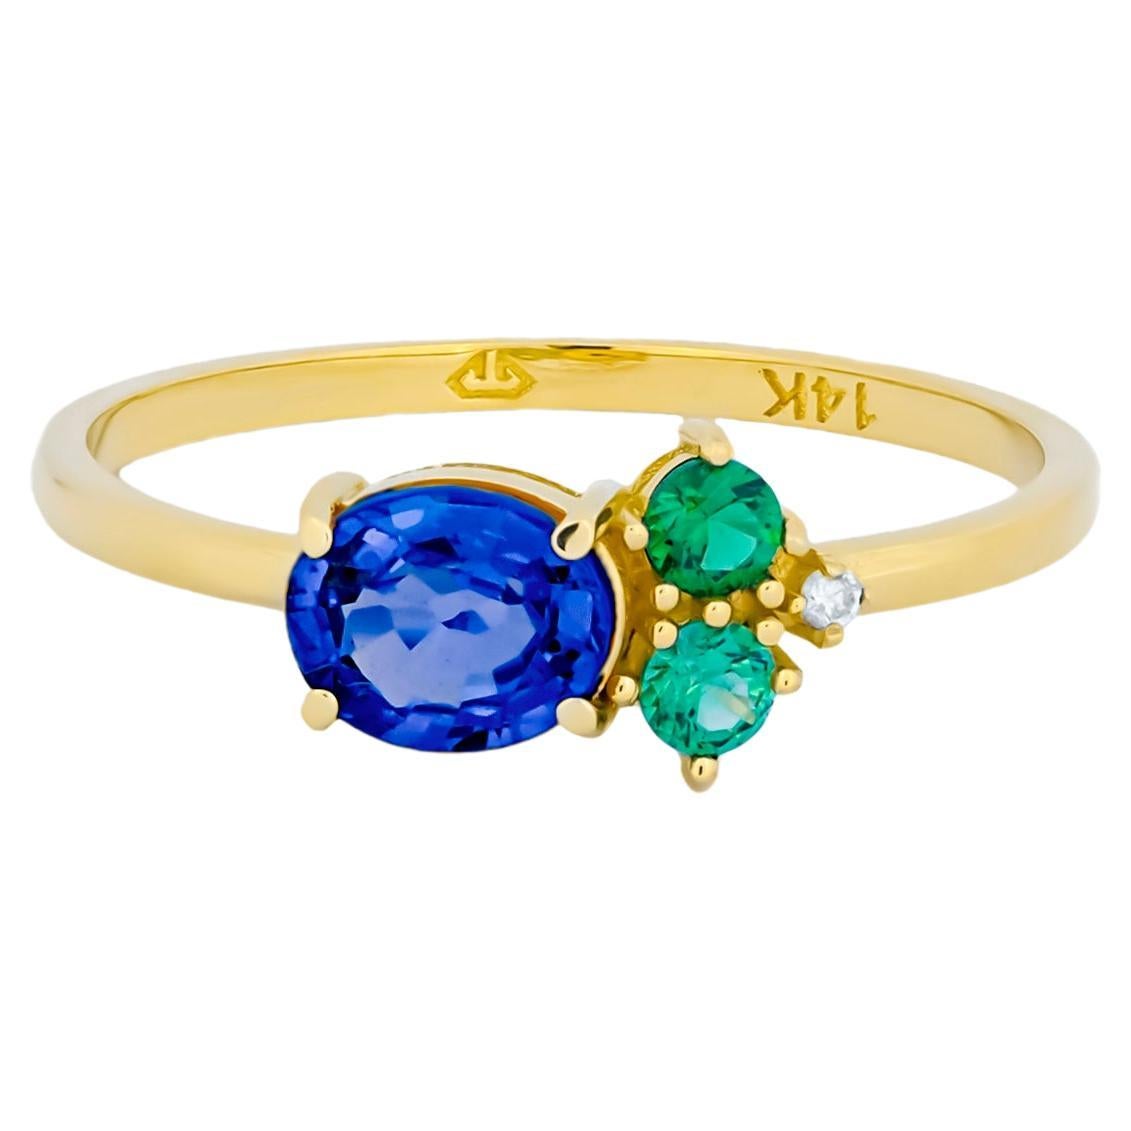 For Sale:  Oval sapphire, tsavorite and diamonds 14k gold ring.